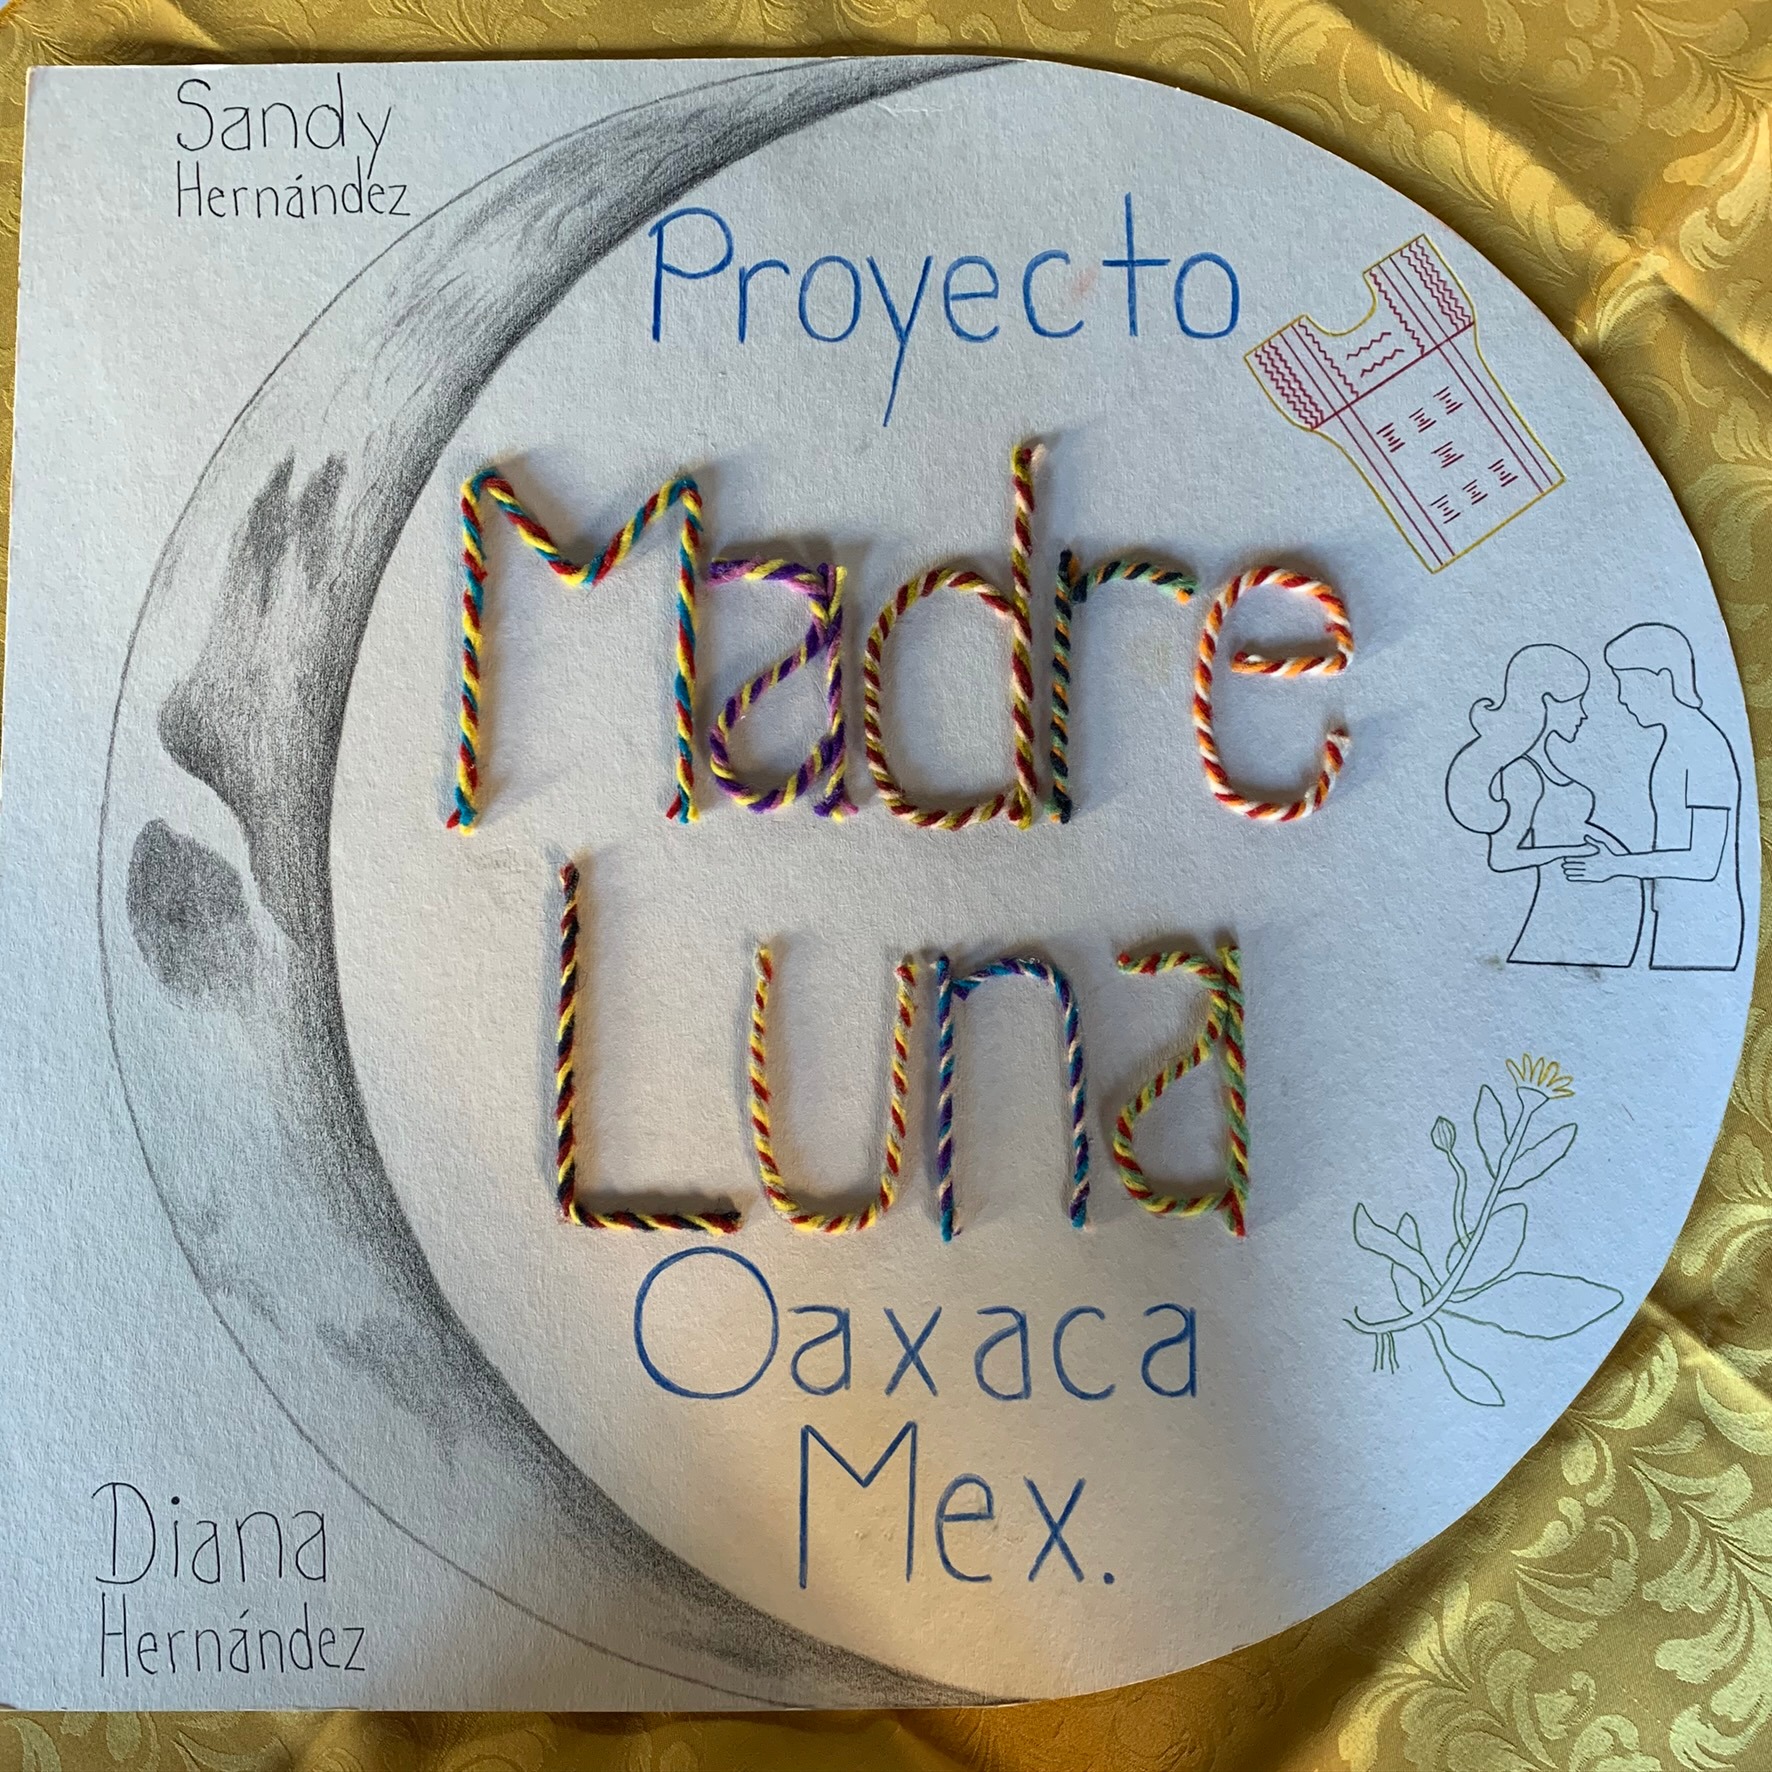  - The Mother Moon project in Oaxaca is focused on natural pigments, medicinal plants, and the work of traditional midwives. (Photo Credit: Isabel Hawkins, Yakanal)